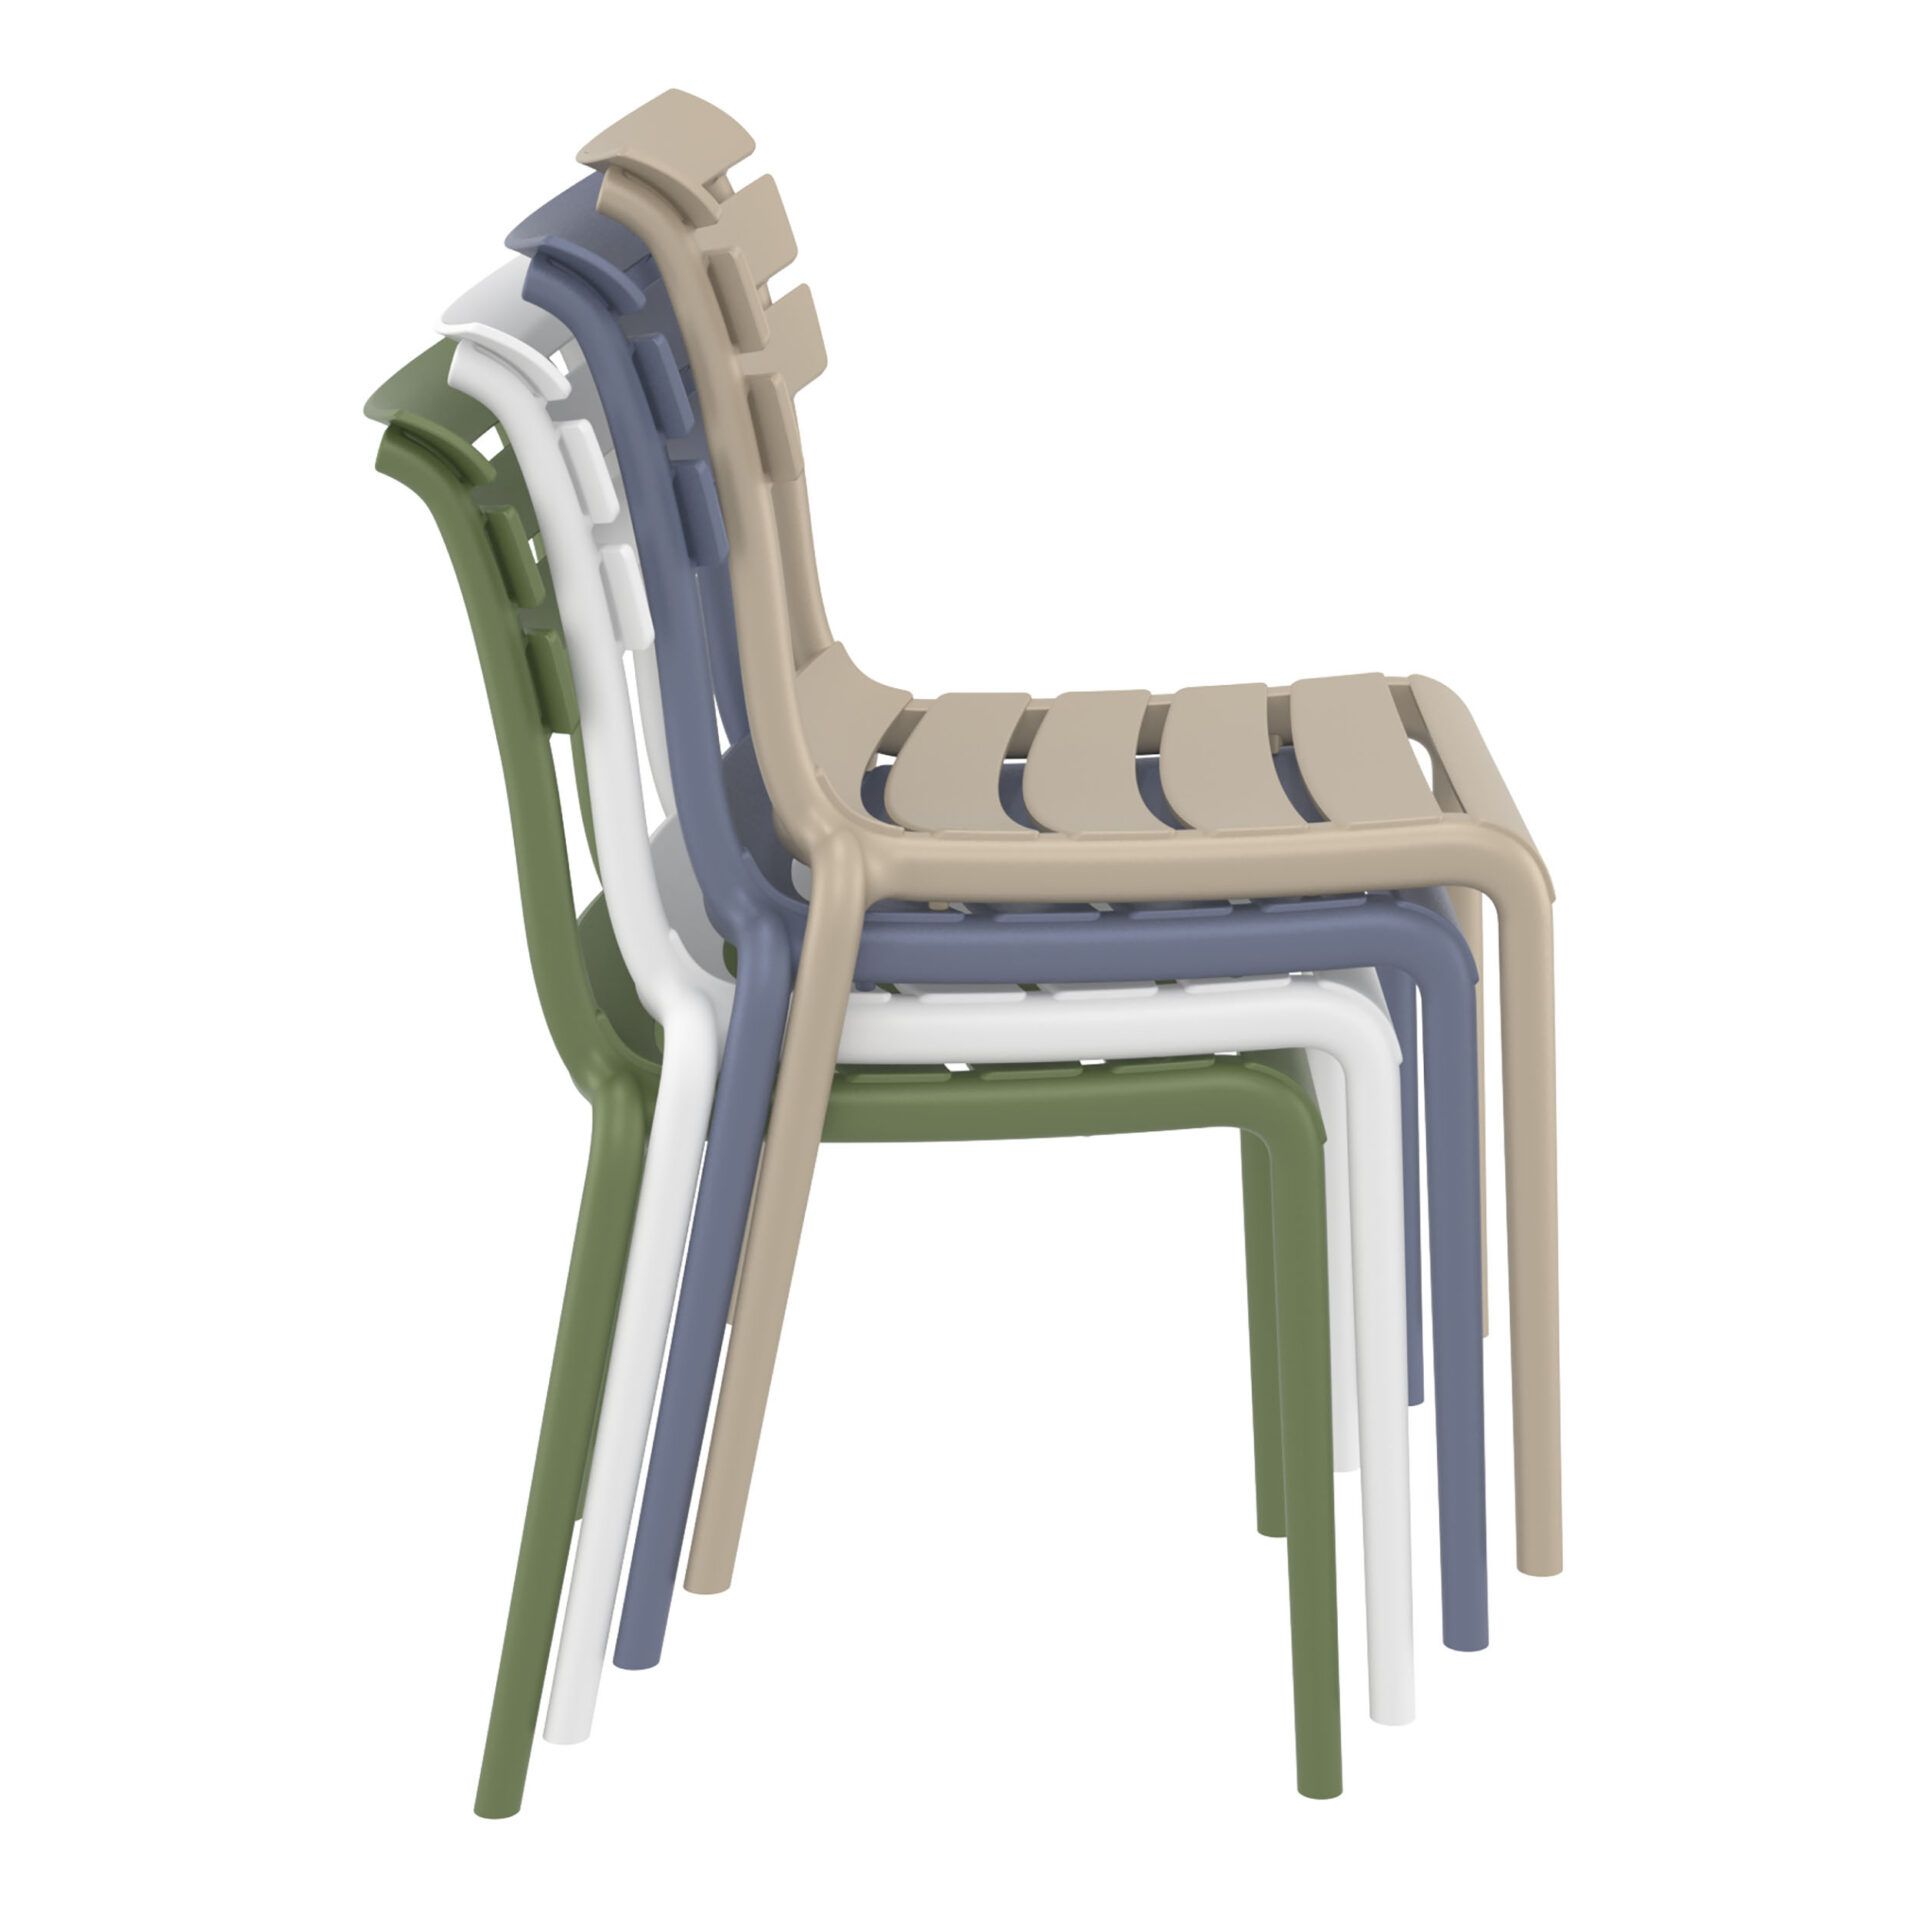 Helen Outdoor Chair available to order now!